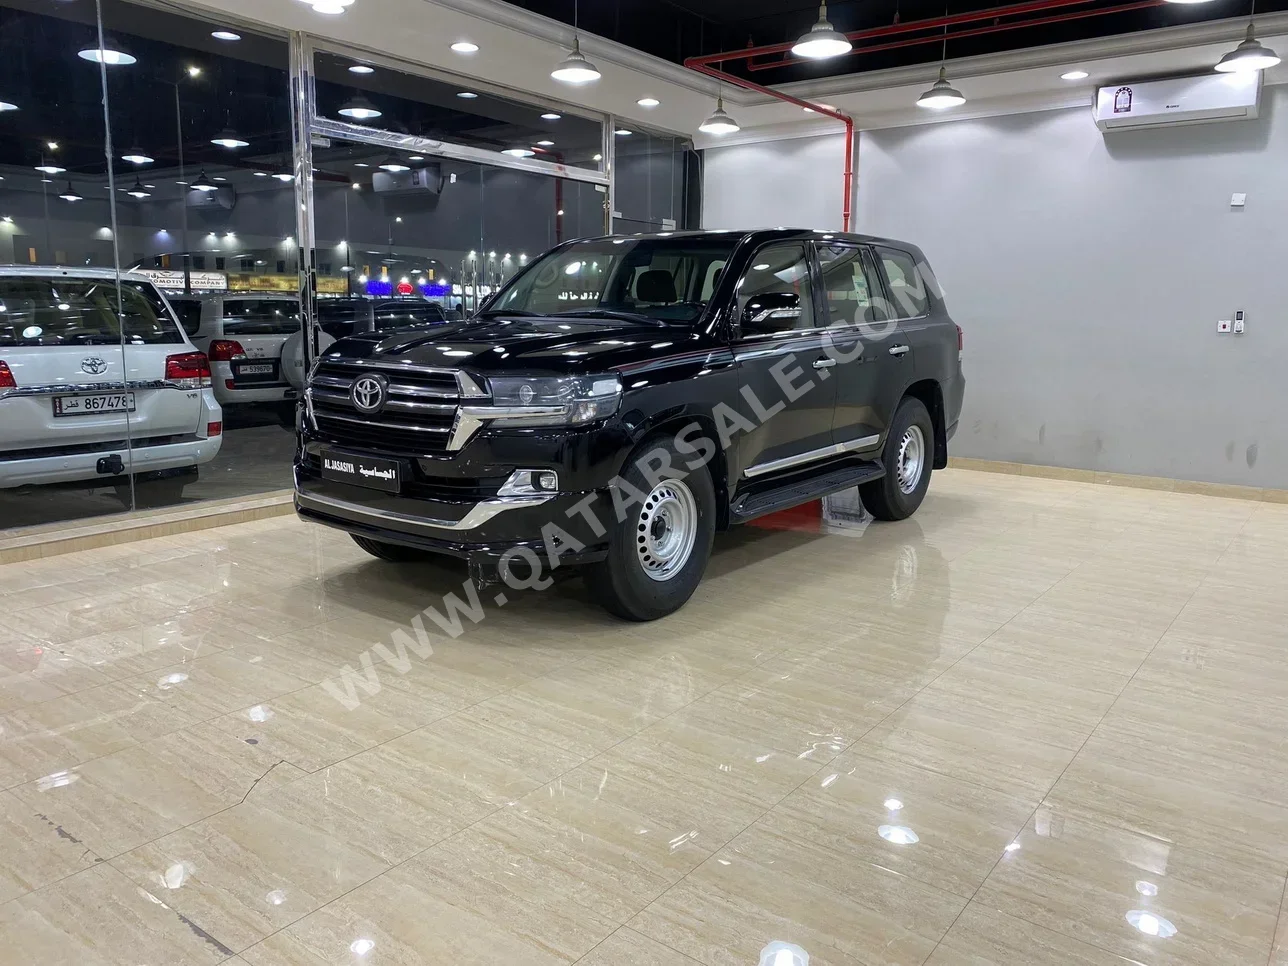 Toyota  Land Cruiser  GXR- Grand Touring  2020  Automatic  235,000 Km  8 Cylinder  Four Wheel Drive (4WD)  SUV  Black